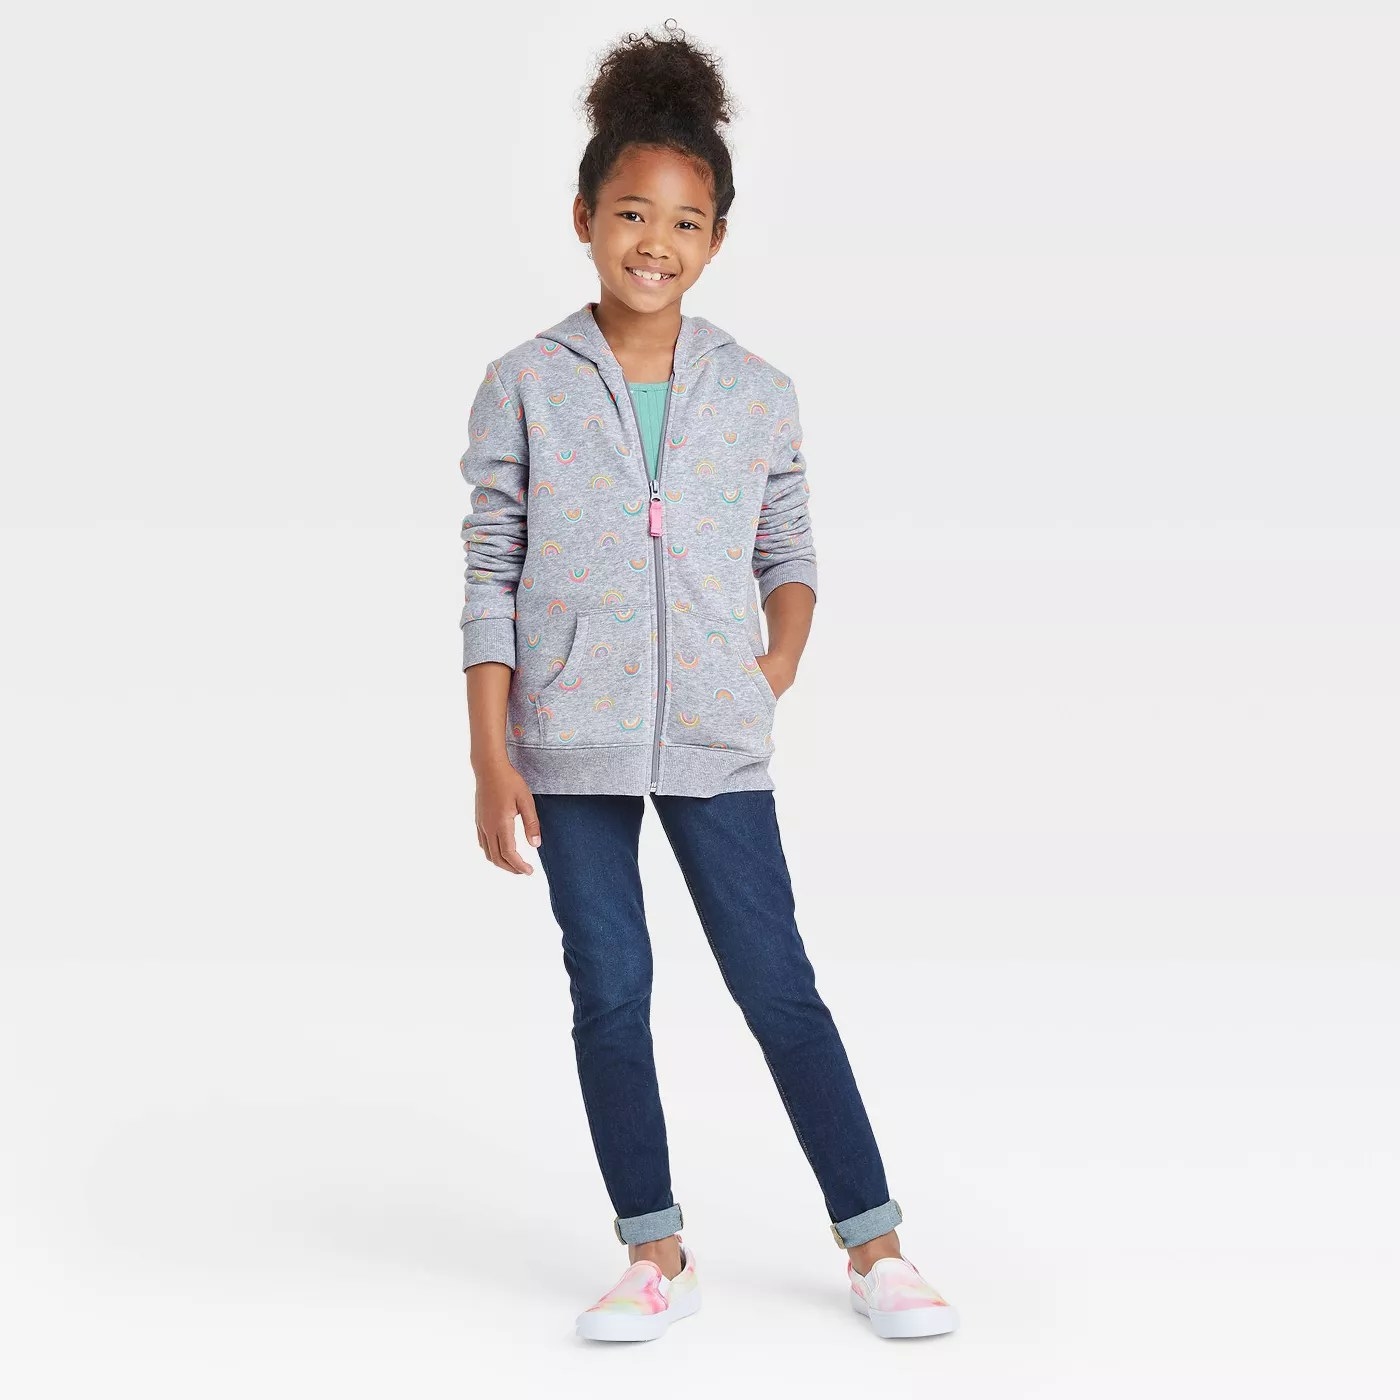 A child wearing a gray zip-up with a rainbow print